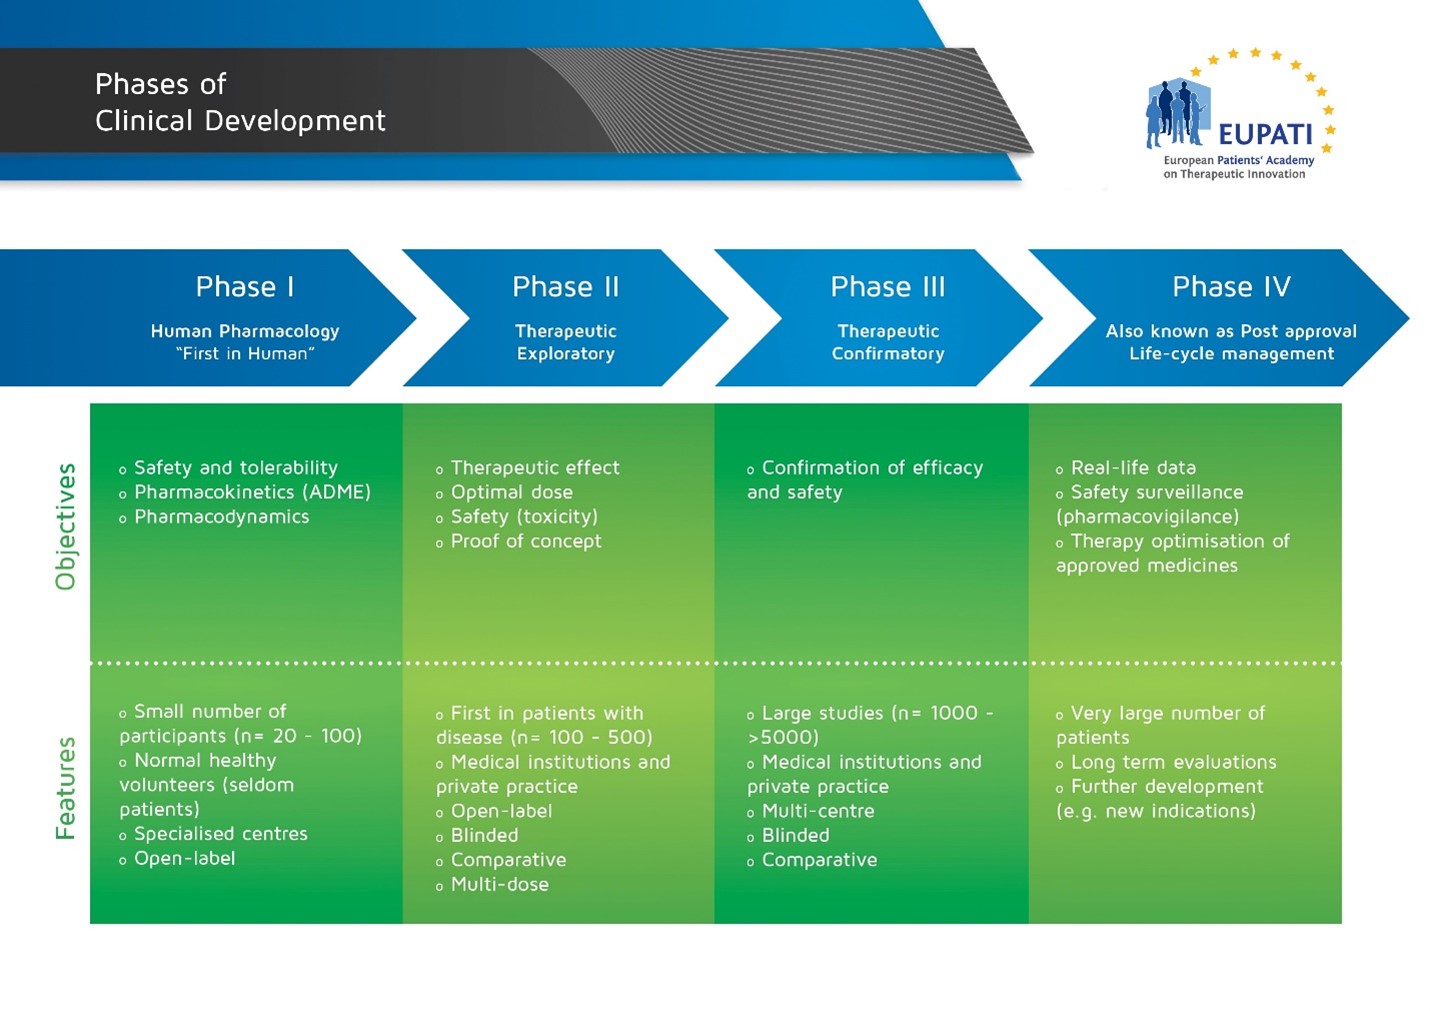 clinical development plan in research